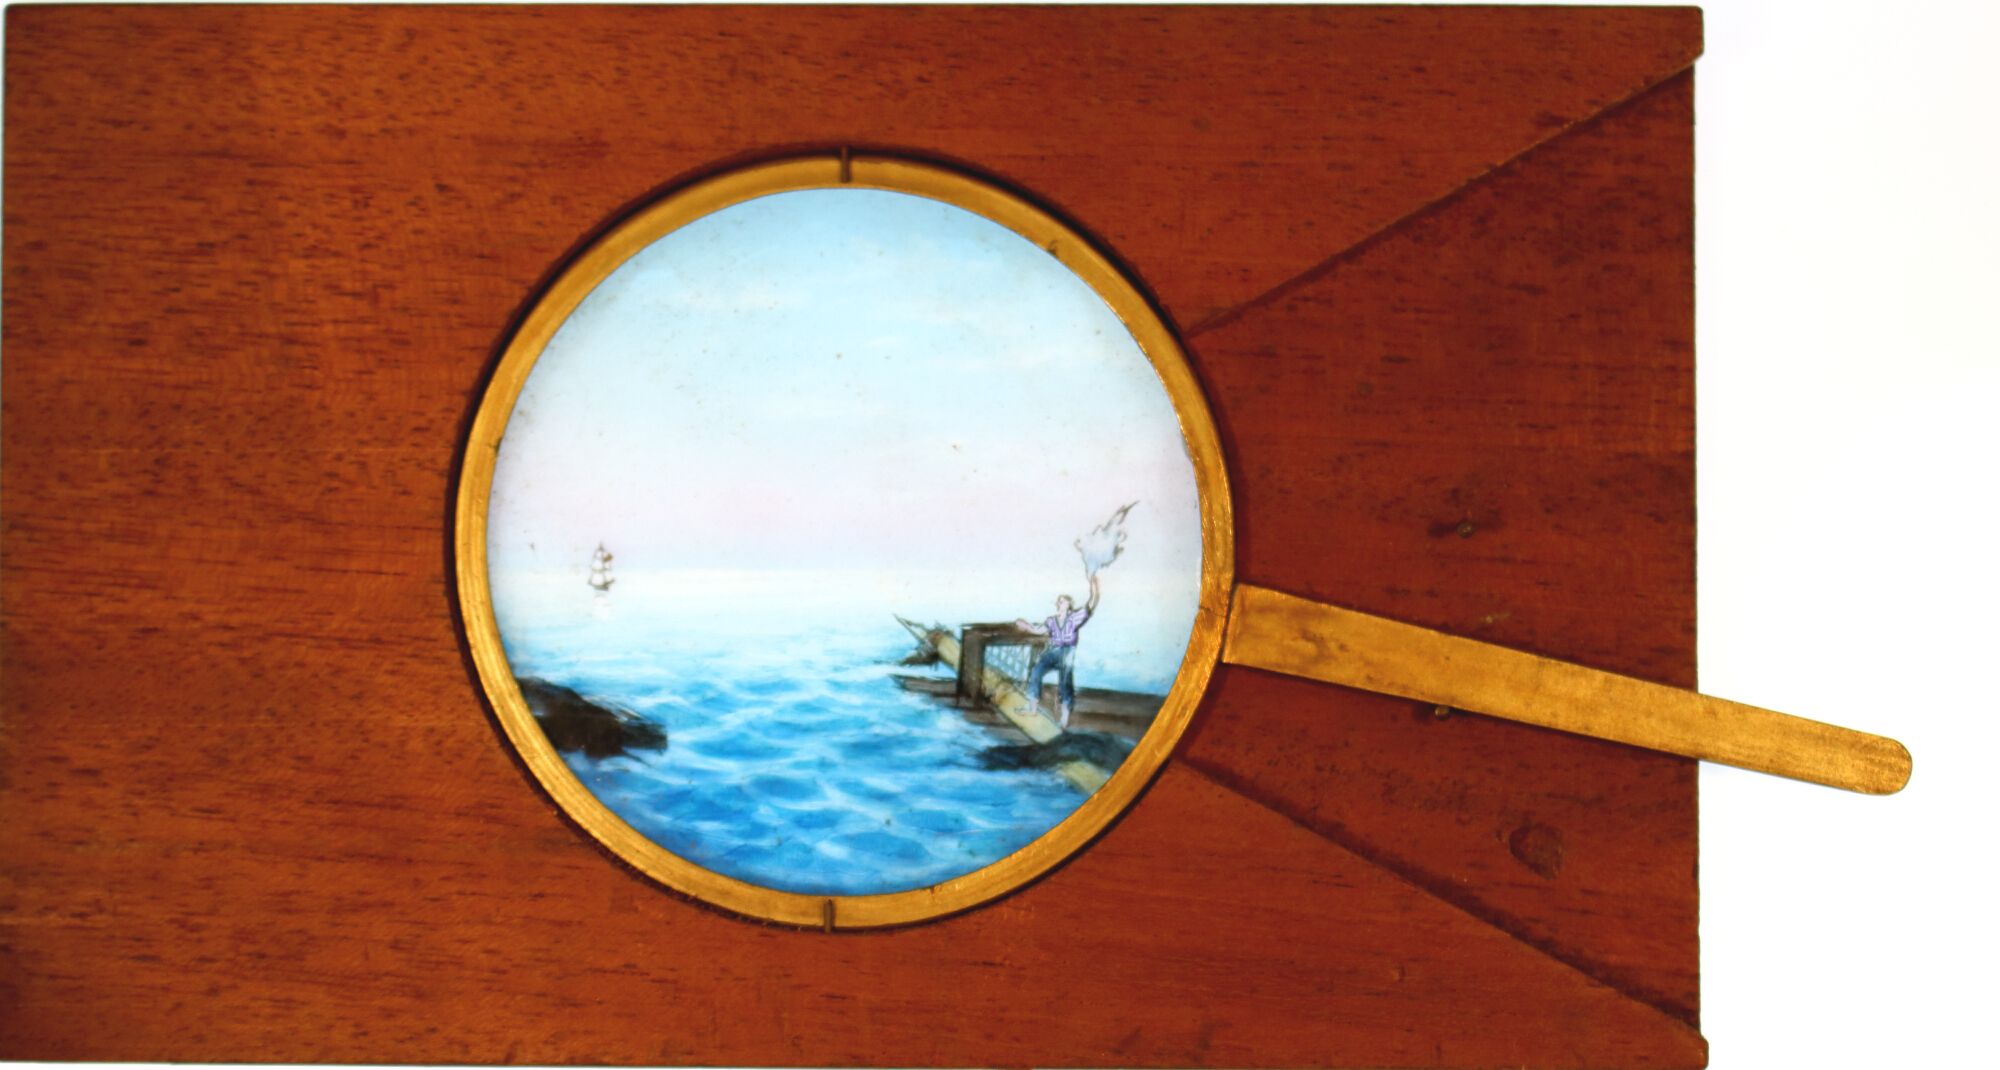 'Ship in storm' [ship rolls in waves] Maker unknown (7 x 4 3/8 x 5/8 inches), single lever Slide 5,' - Image 5 of 6